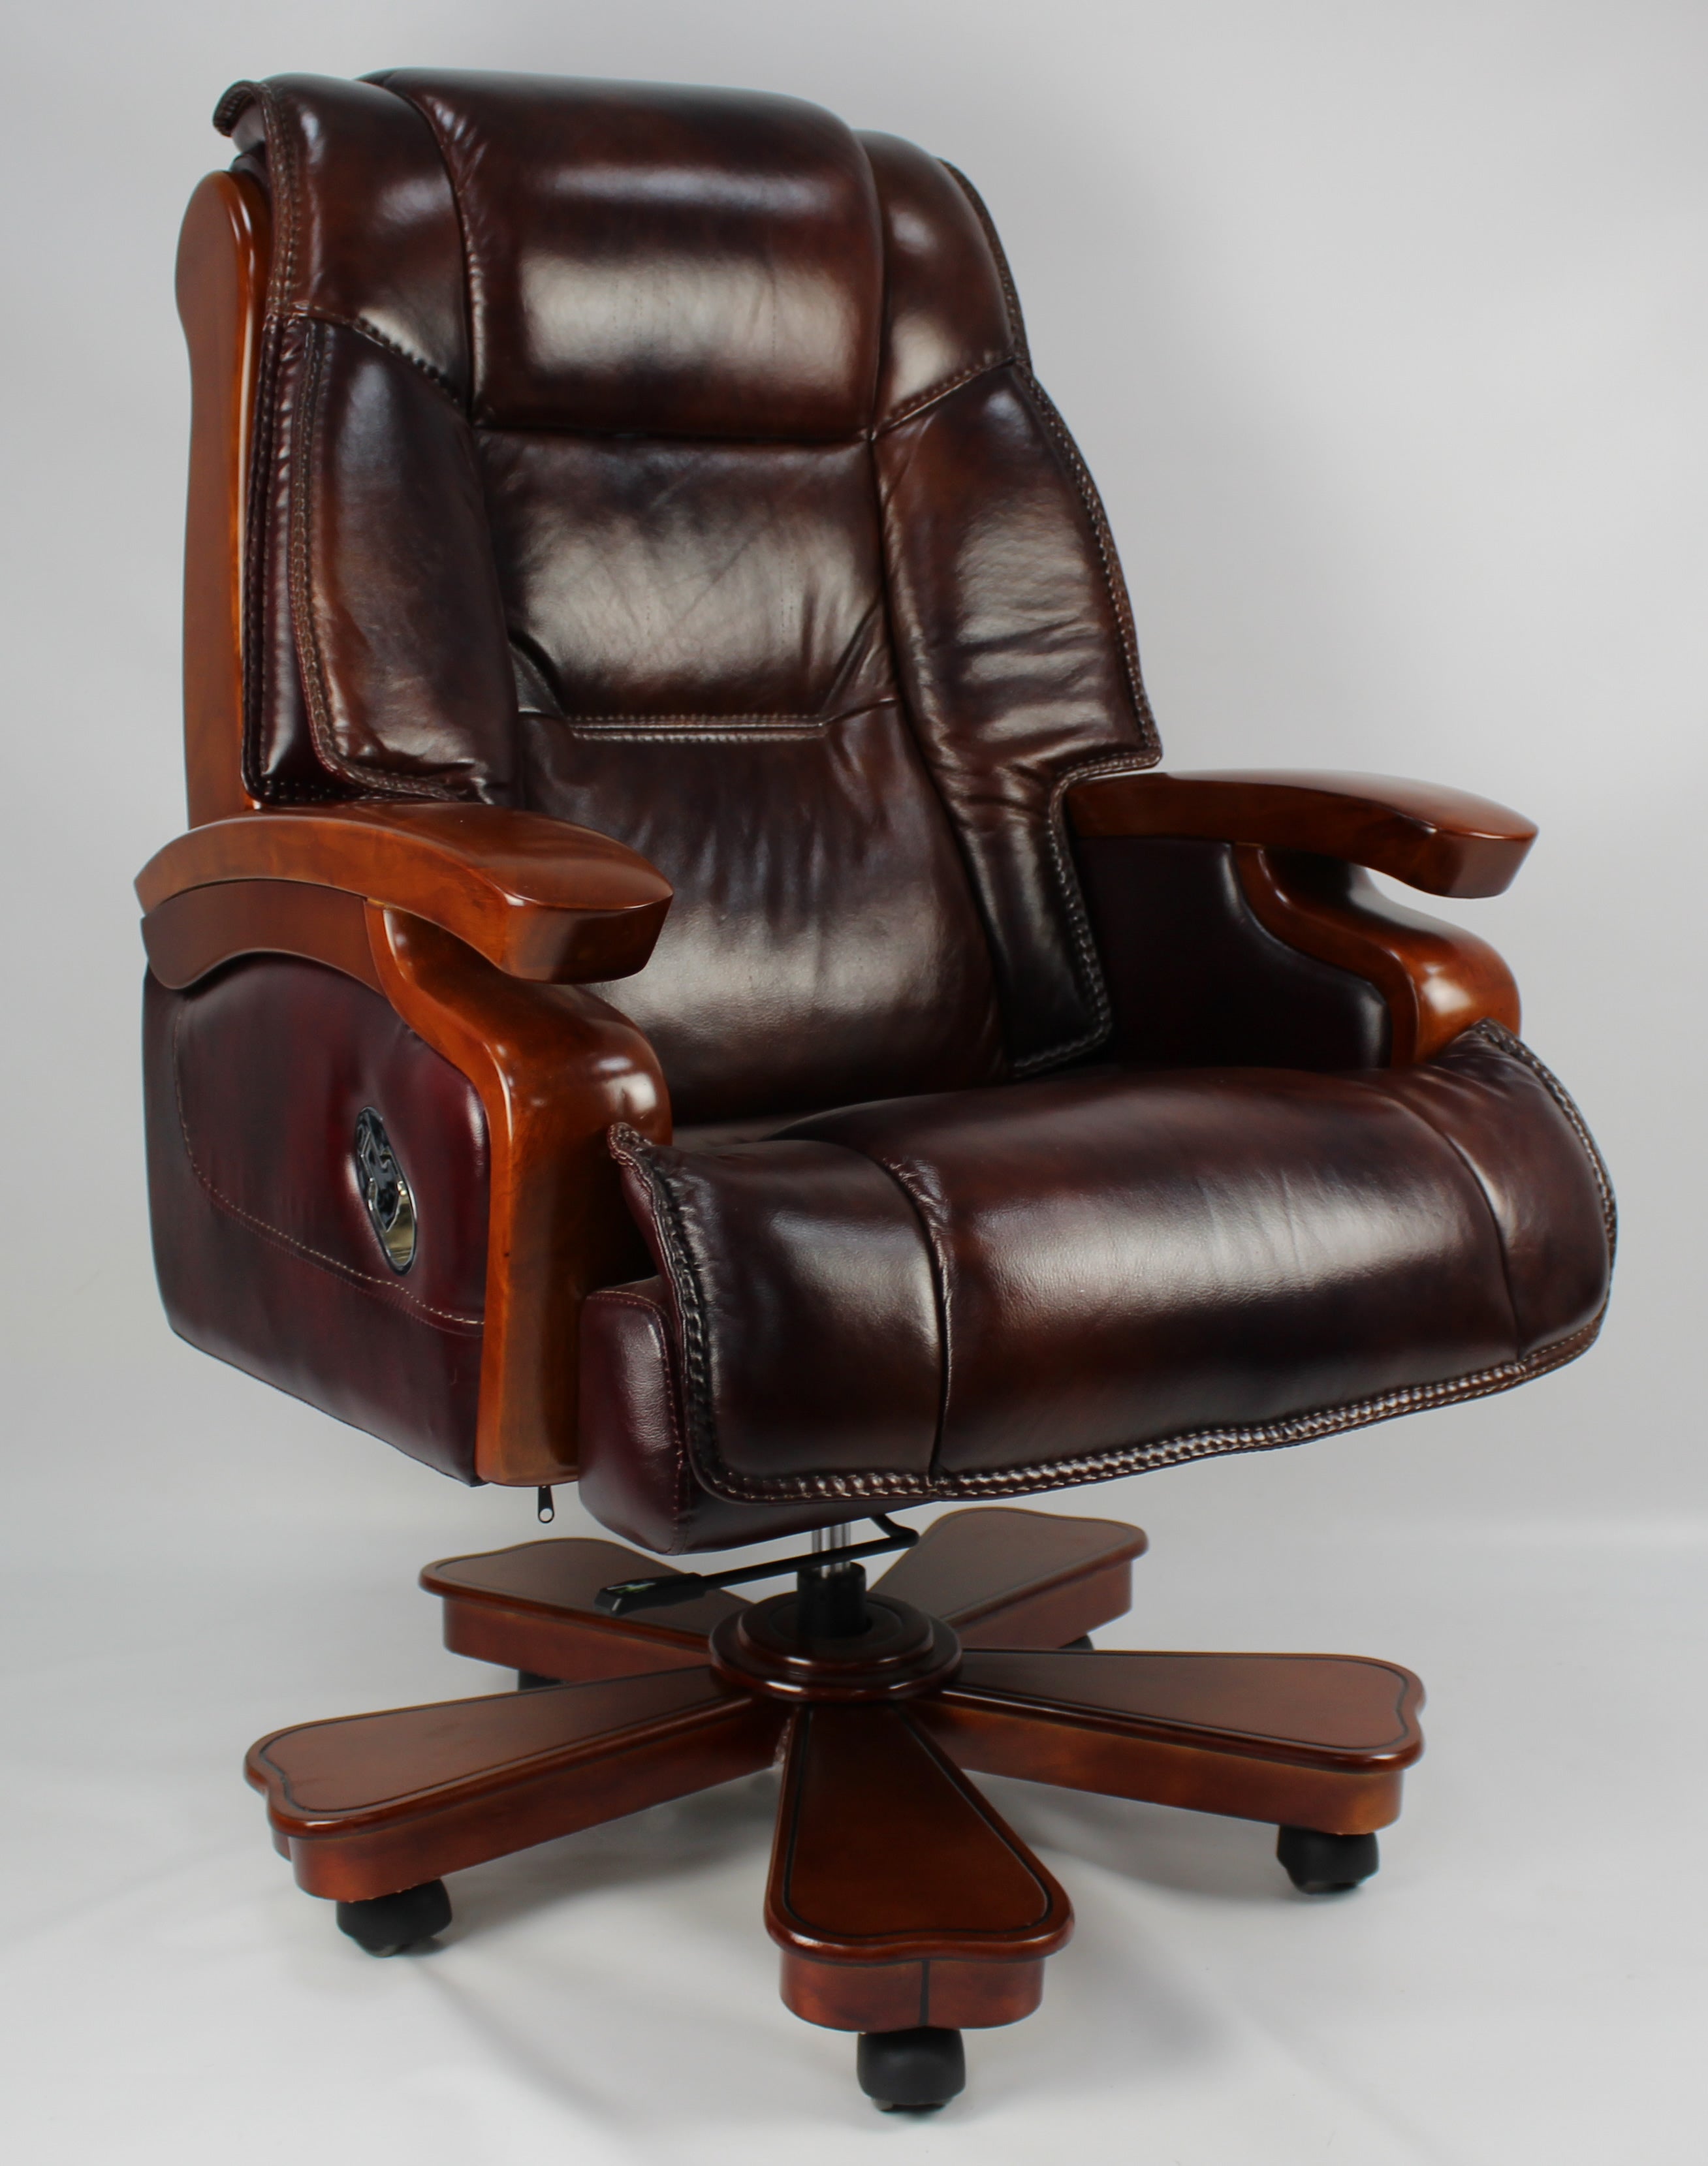 Real Italian Leather Burgundy Executive Office Chair - A771 UK